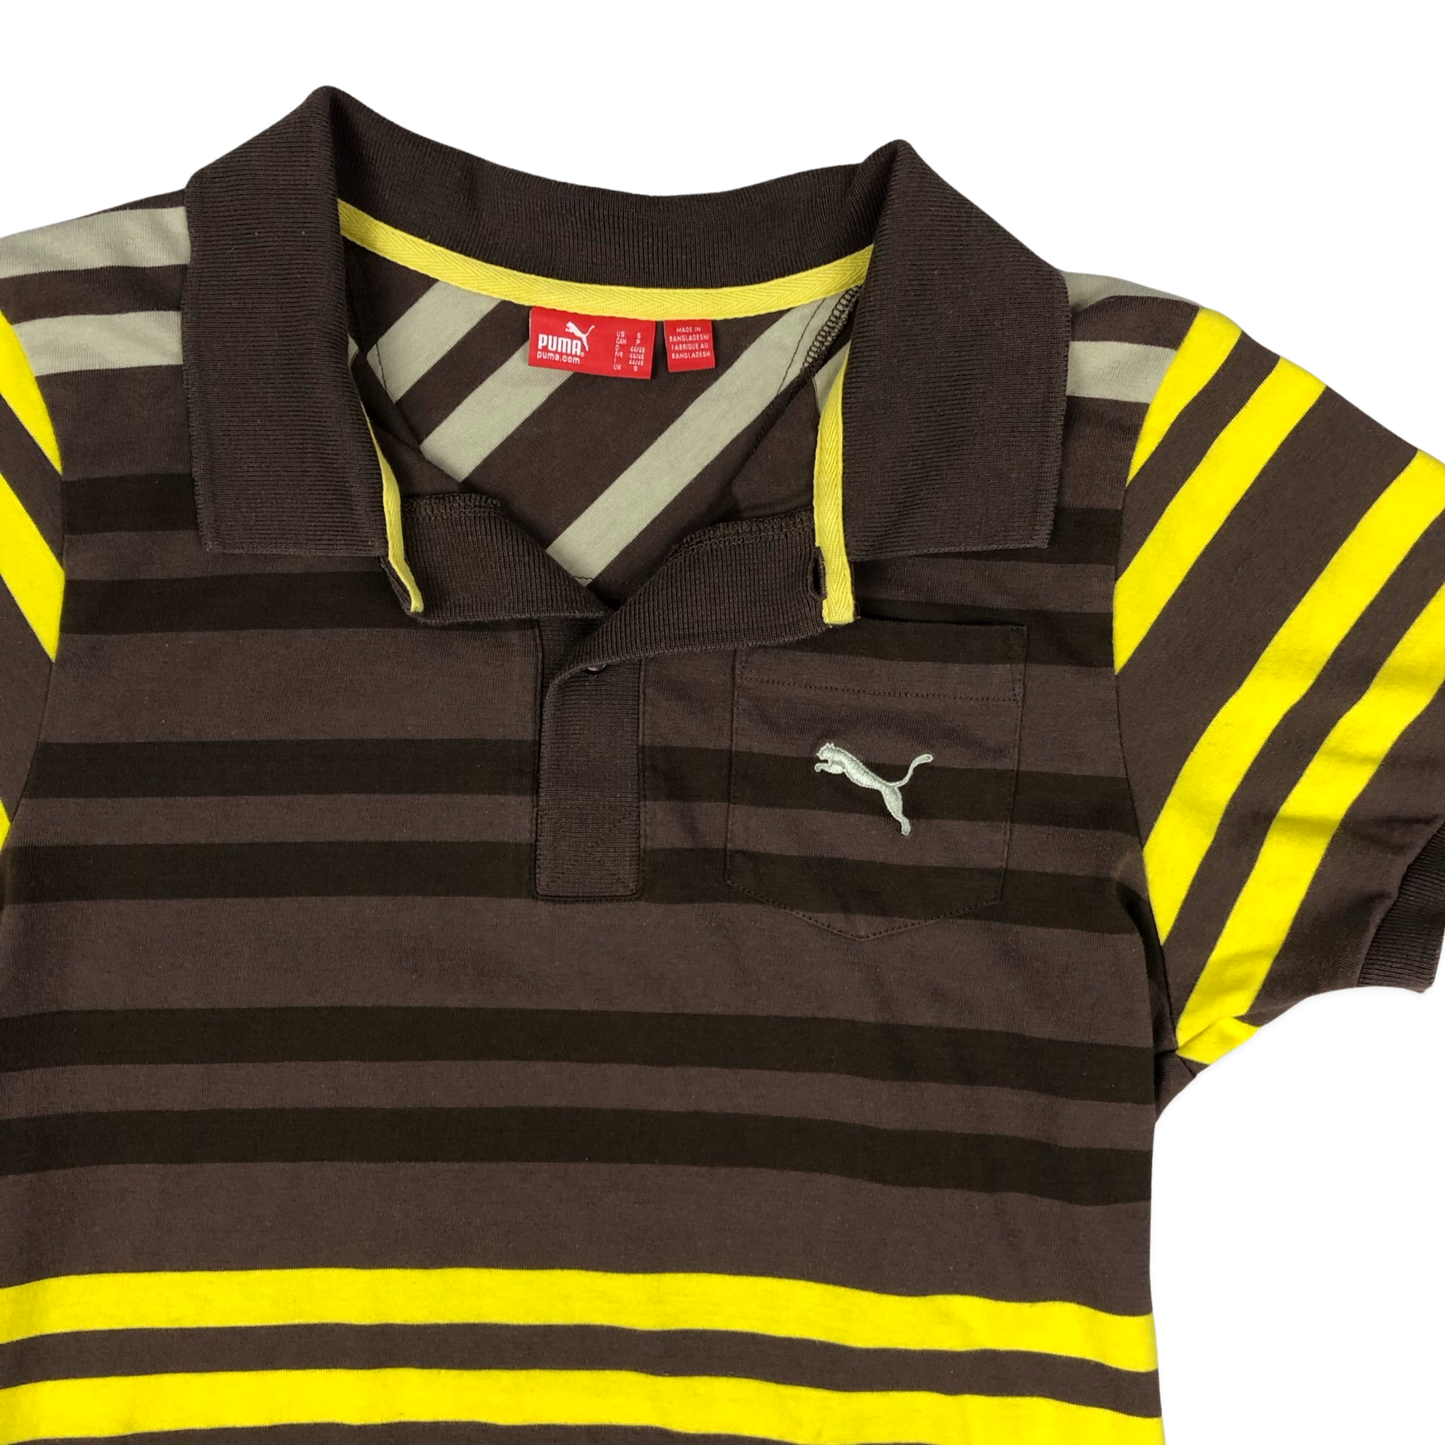 Vintage Puma Yellow and Brown Striped Polo Shirt S